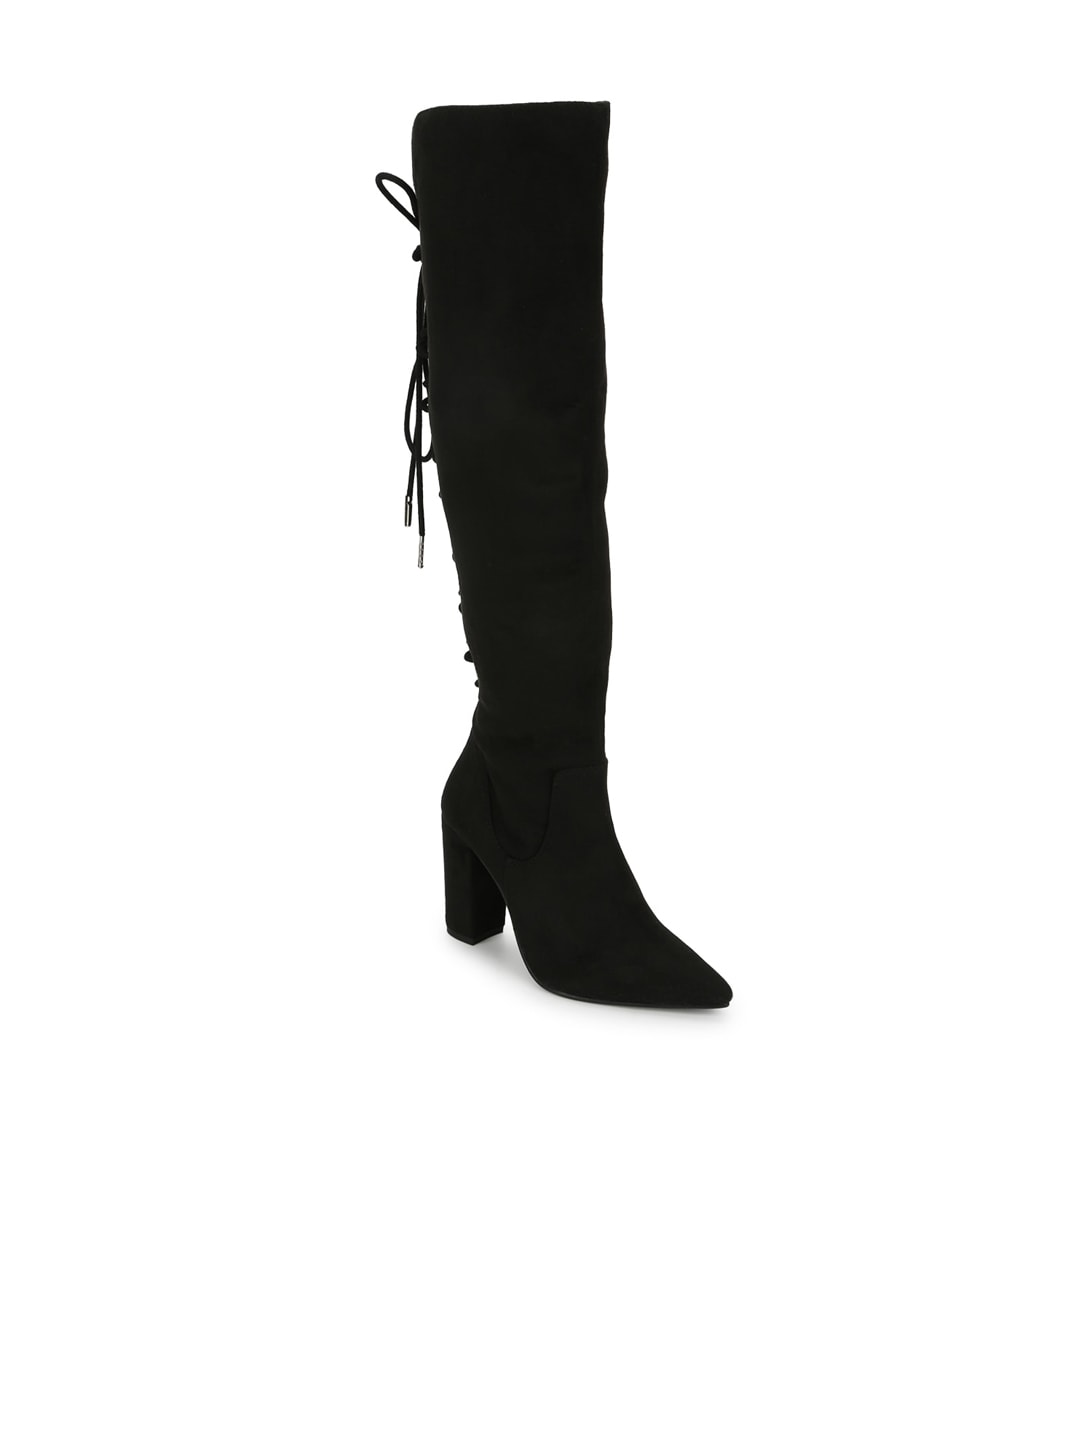 Truffle Collection Black Suede Block Heeled Boots with Tassels Price in India